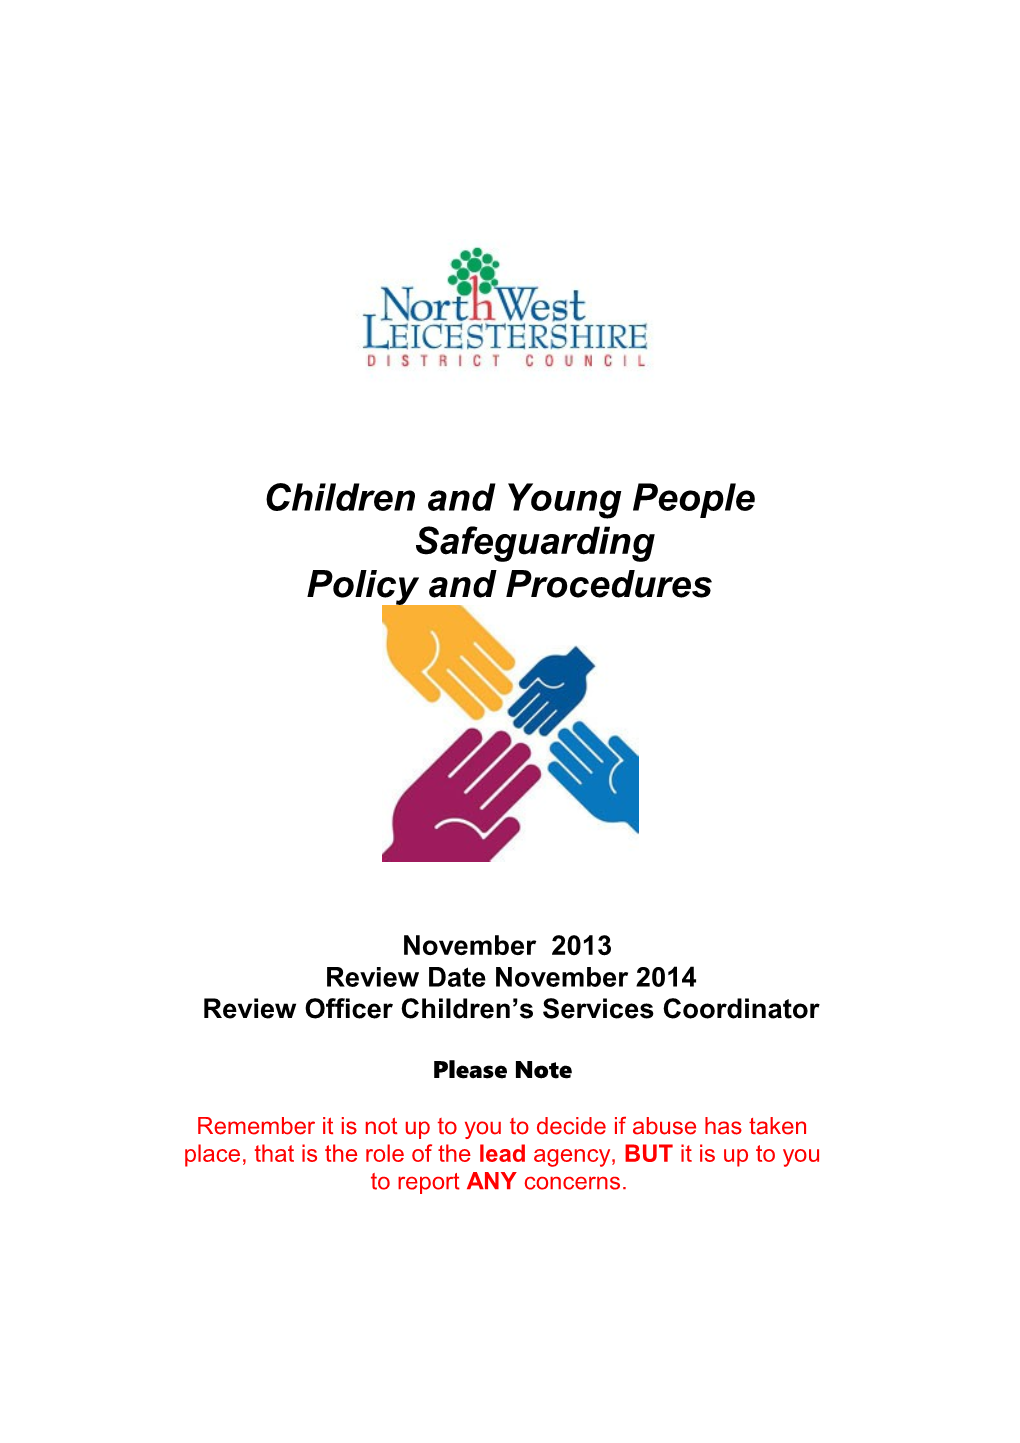 Leicestershire District & Borough Counci's Children & Vulnerable Adults Safeguarding Policy